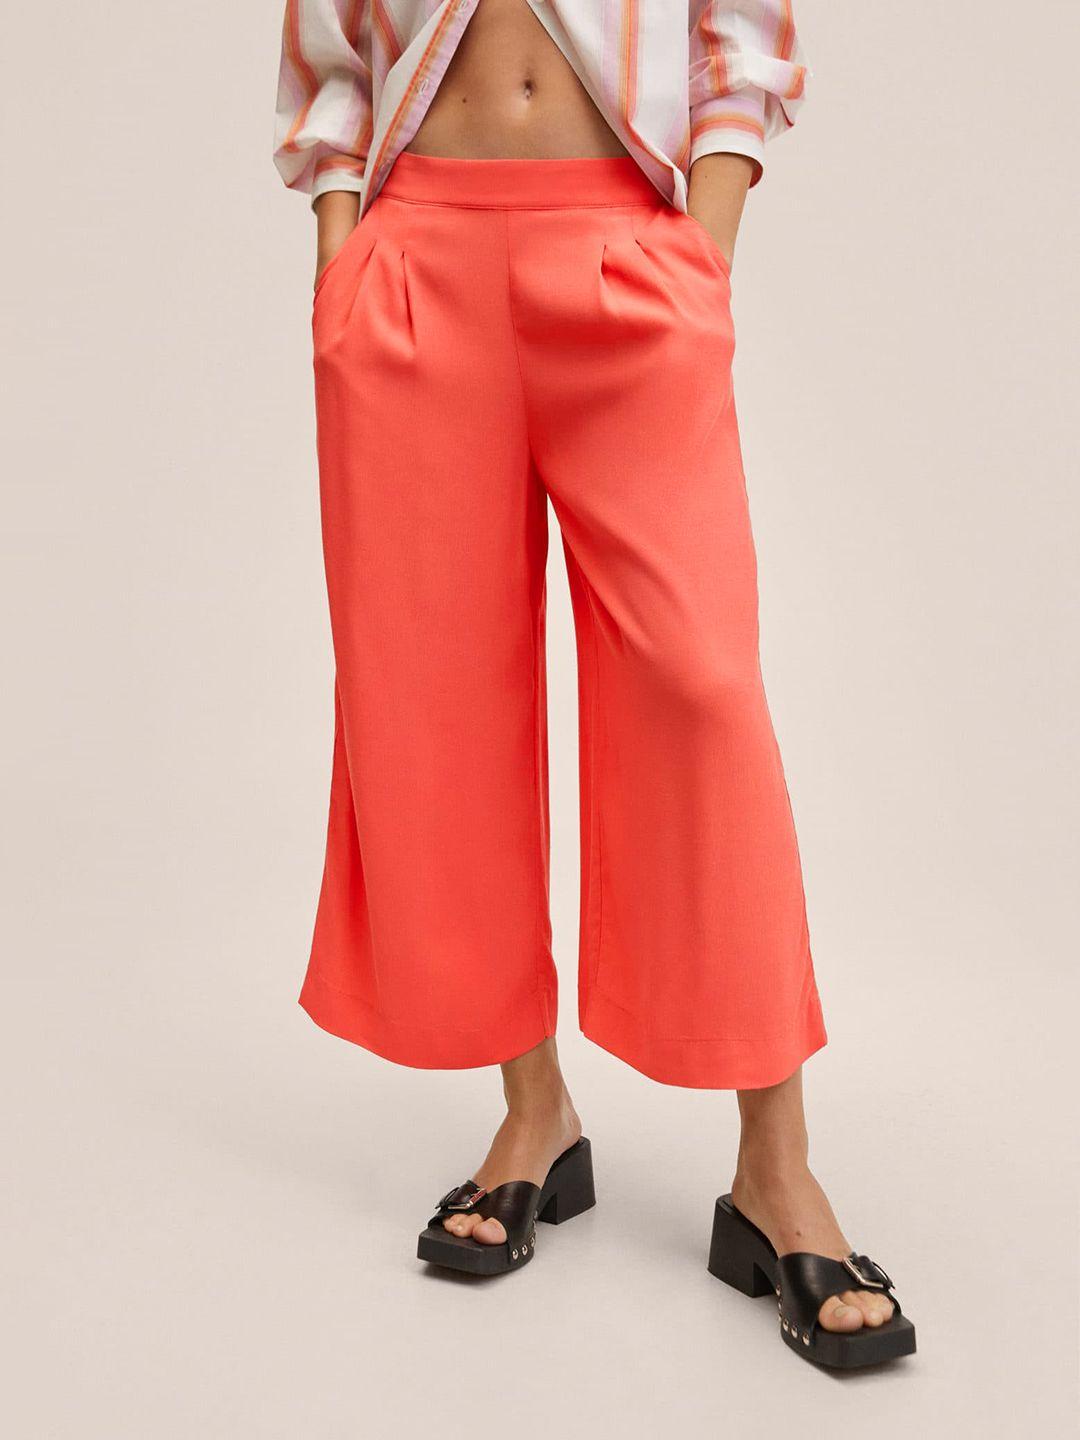 mango women coral pink solid flared pleated culottes trousers